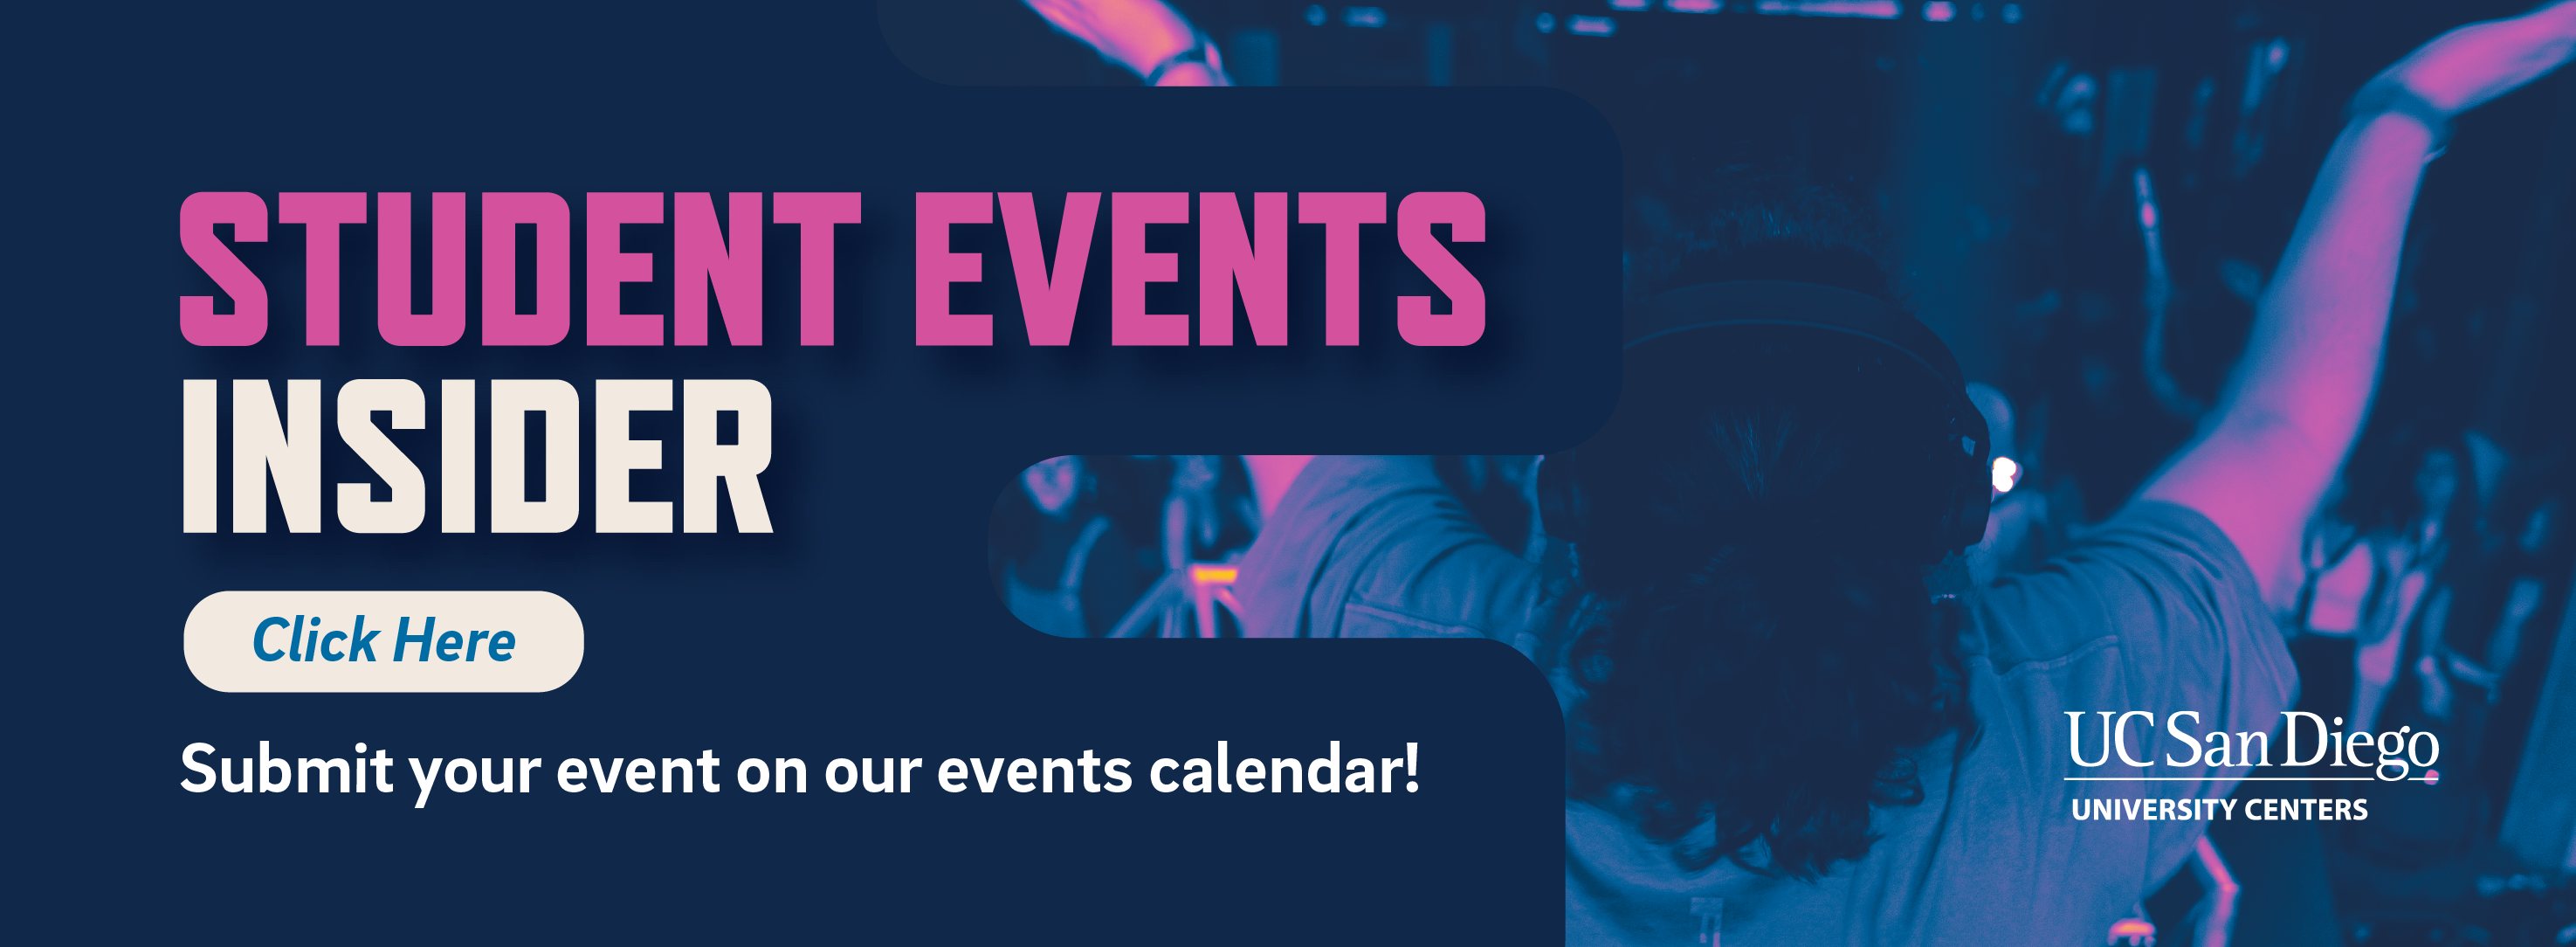 Fill out an event submission form to be featured in our events calendar